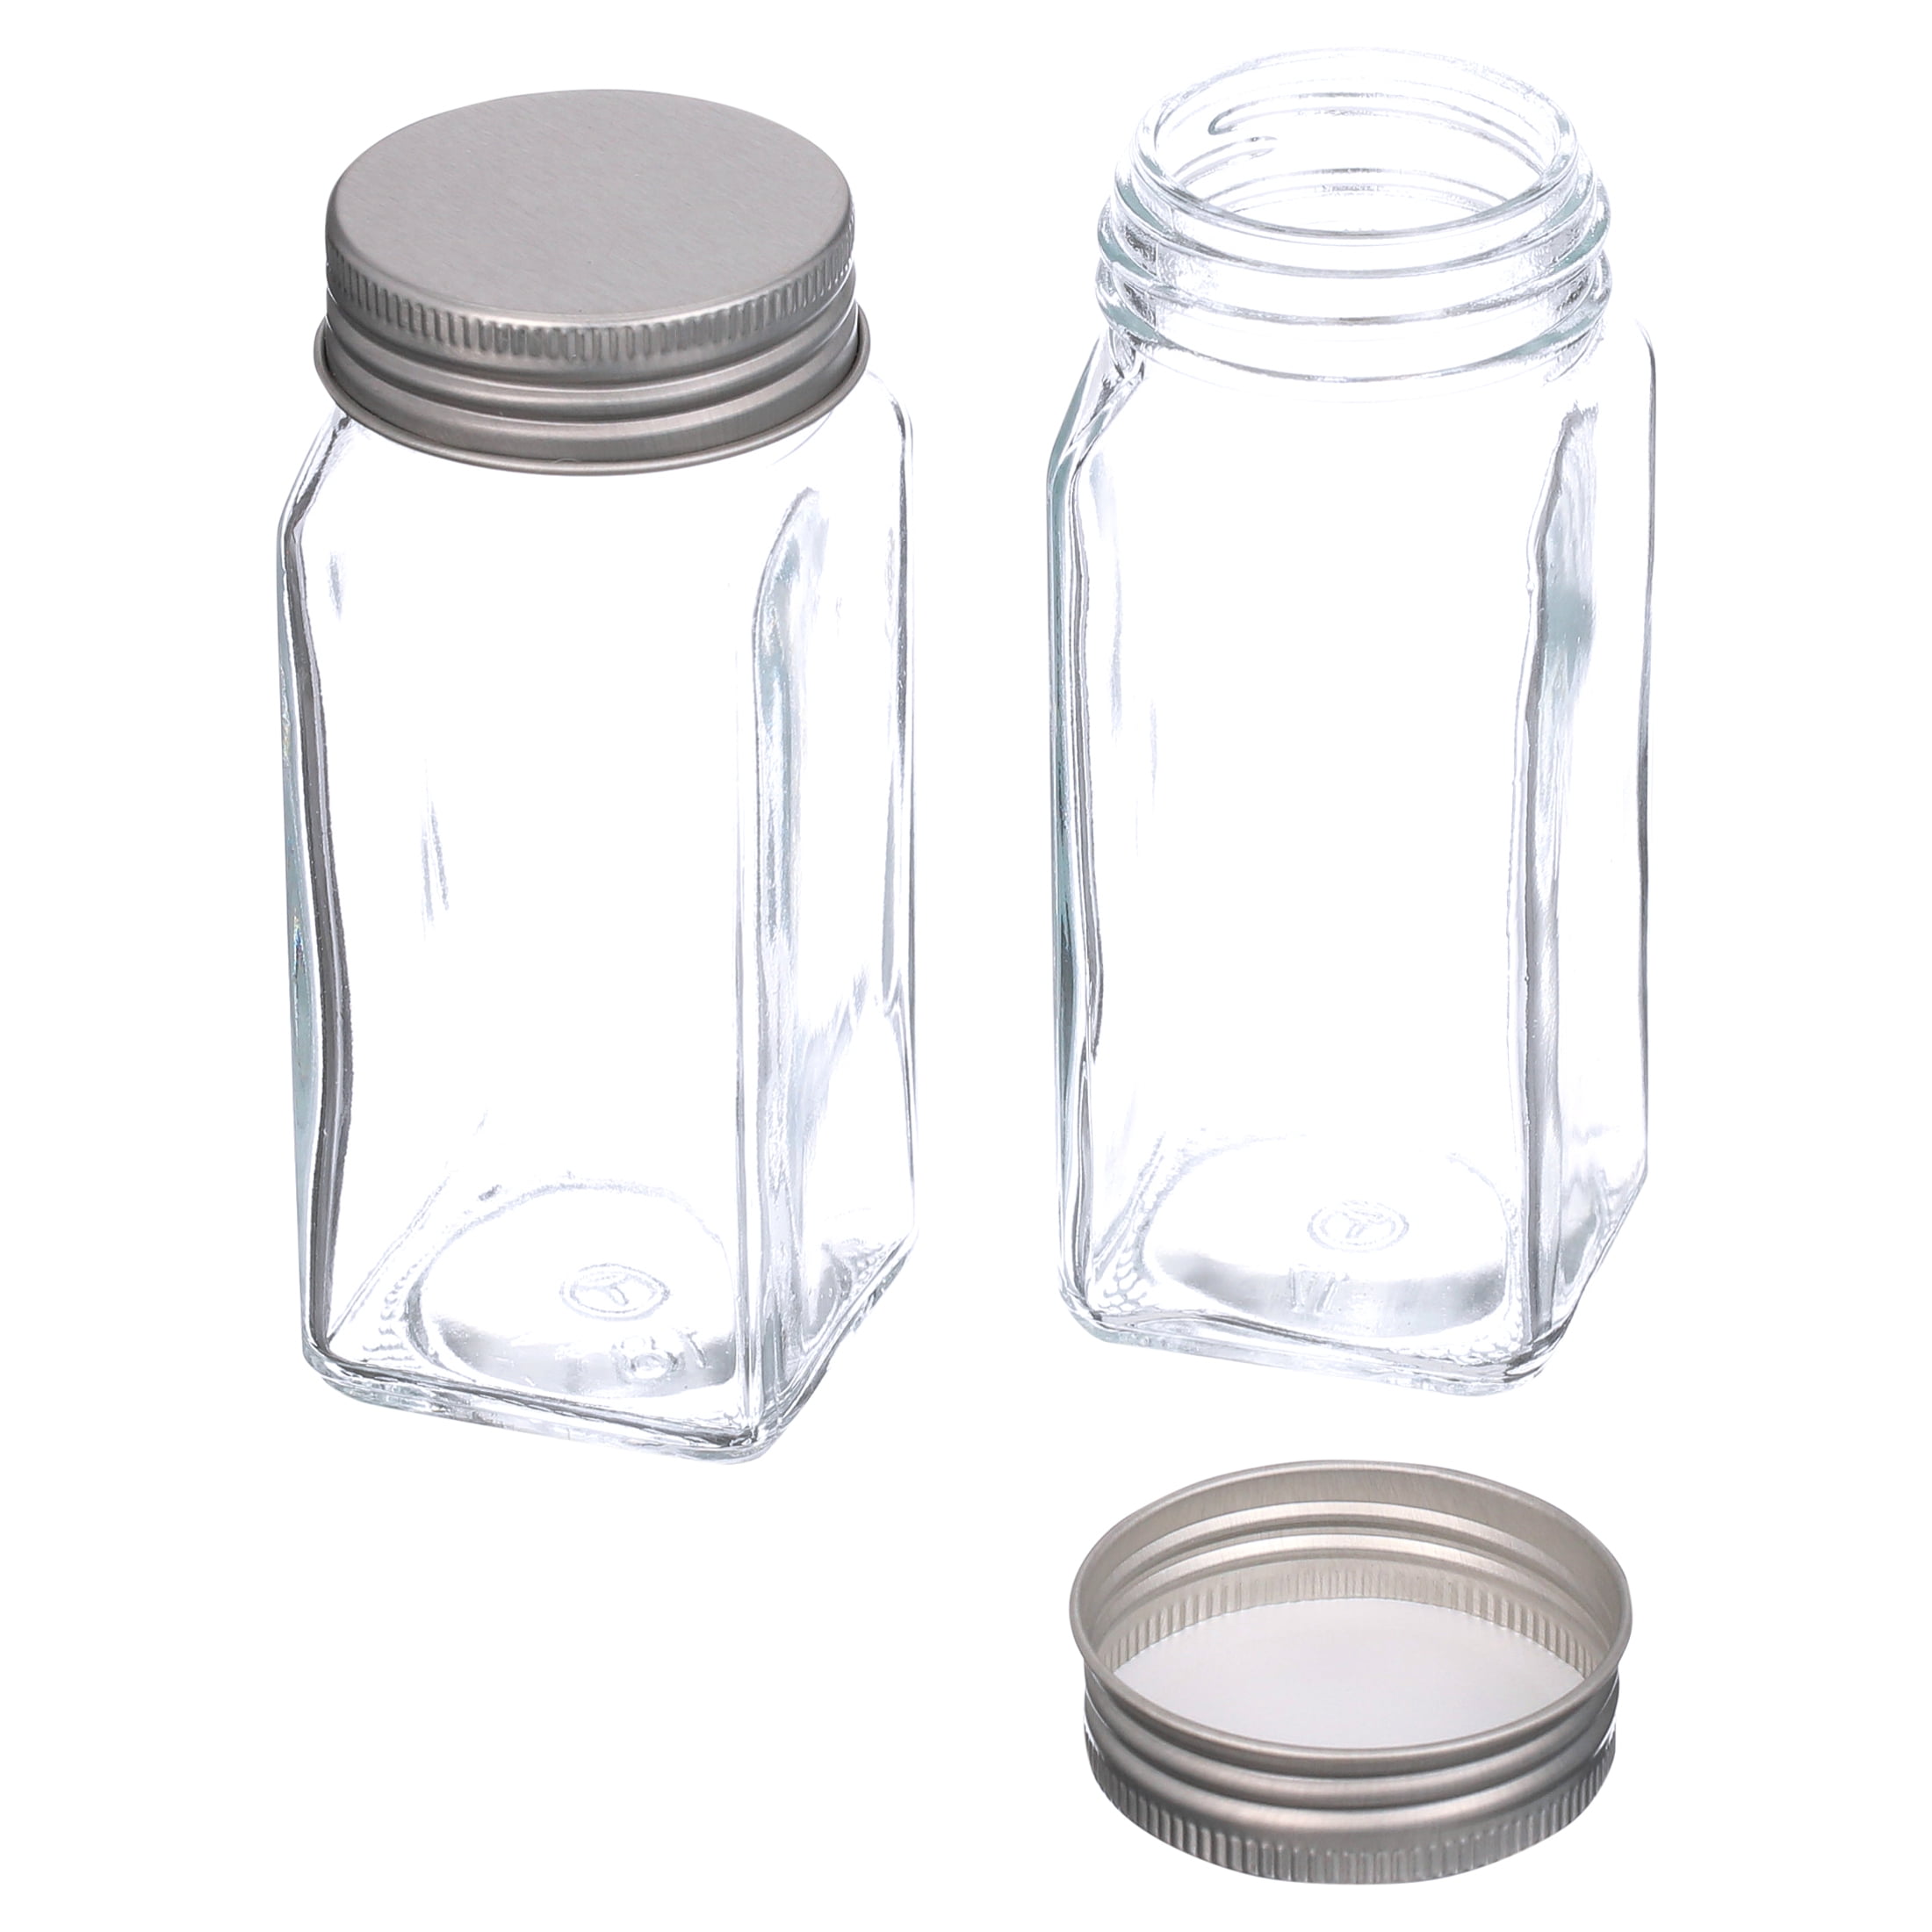 16 Pack 6 oz Glass Spice & Salts Jars Bottles, Clear Square Glass Seasoning  Jars With Aluminum Silver Metal Caps and Pour/Sift Shaker Lid. 1 Pen,40  Black Labels and 1 Foldable Wide